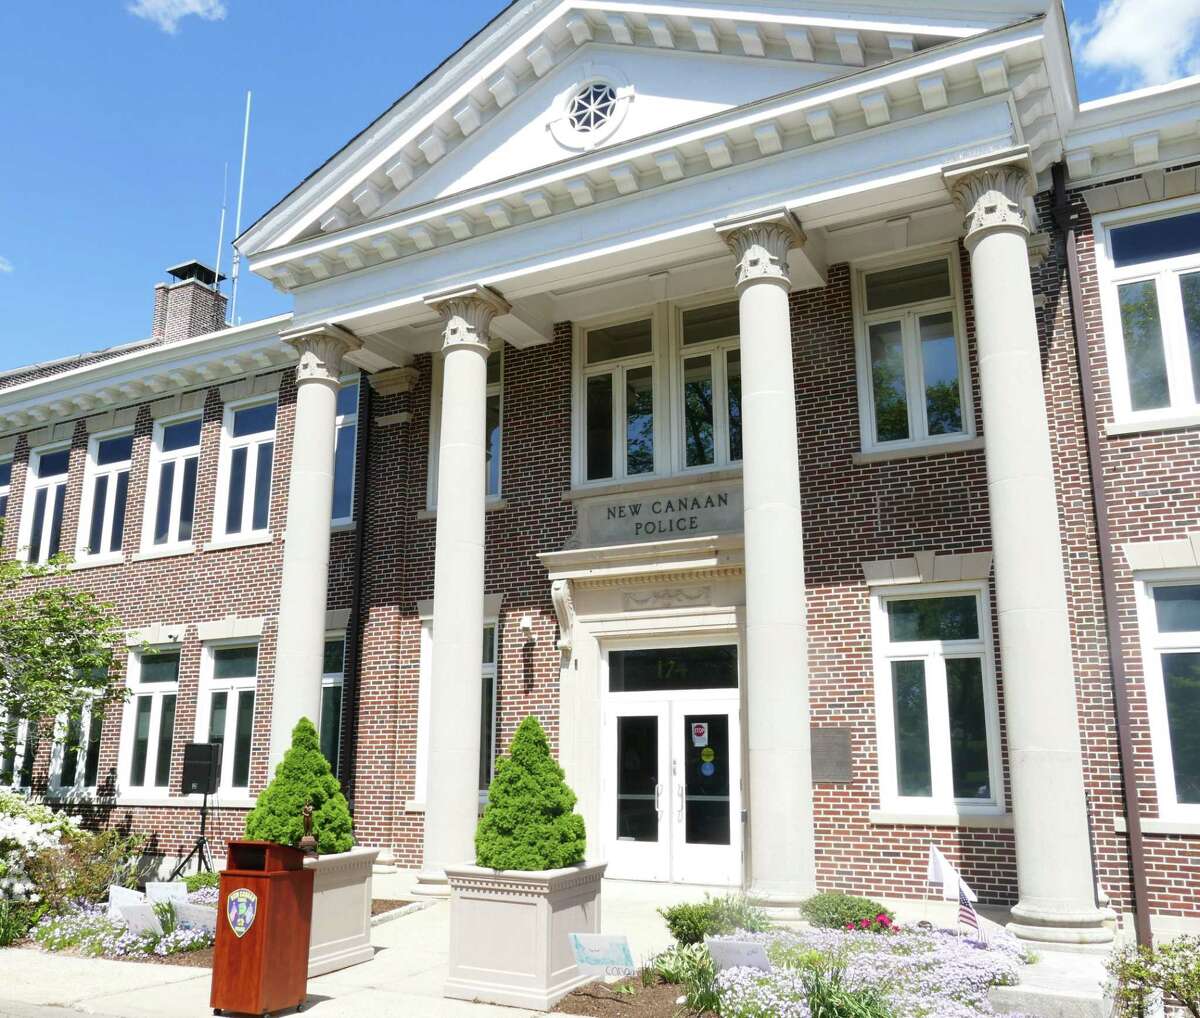 New Canaan police headquarters. The department is asking people to lock up their valuables, after a recent spate of larcenies that included a car theft.